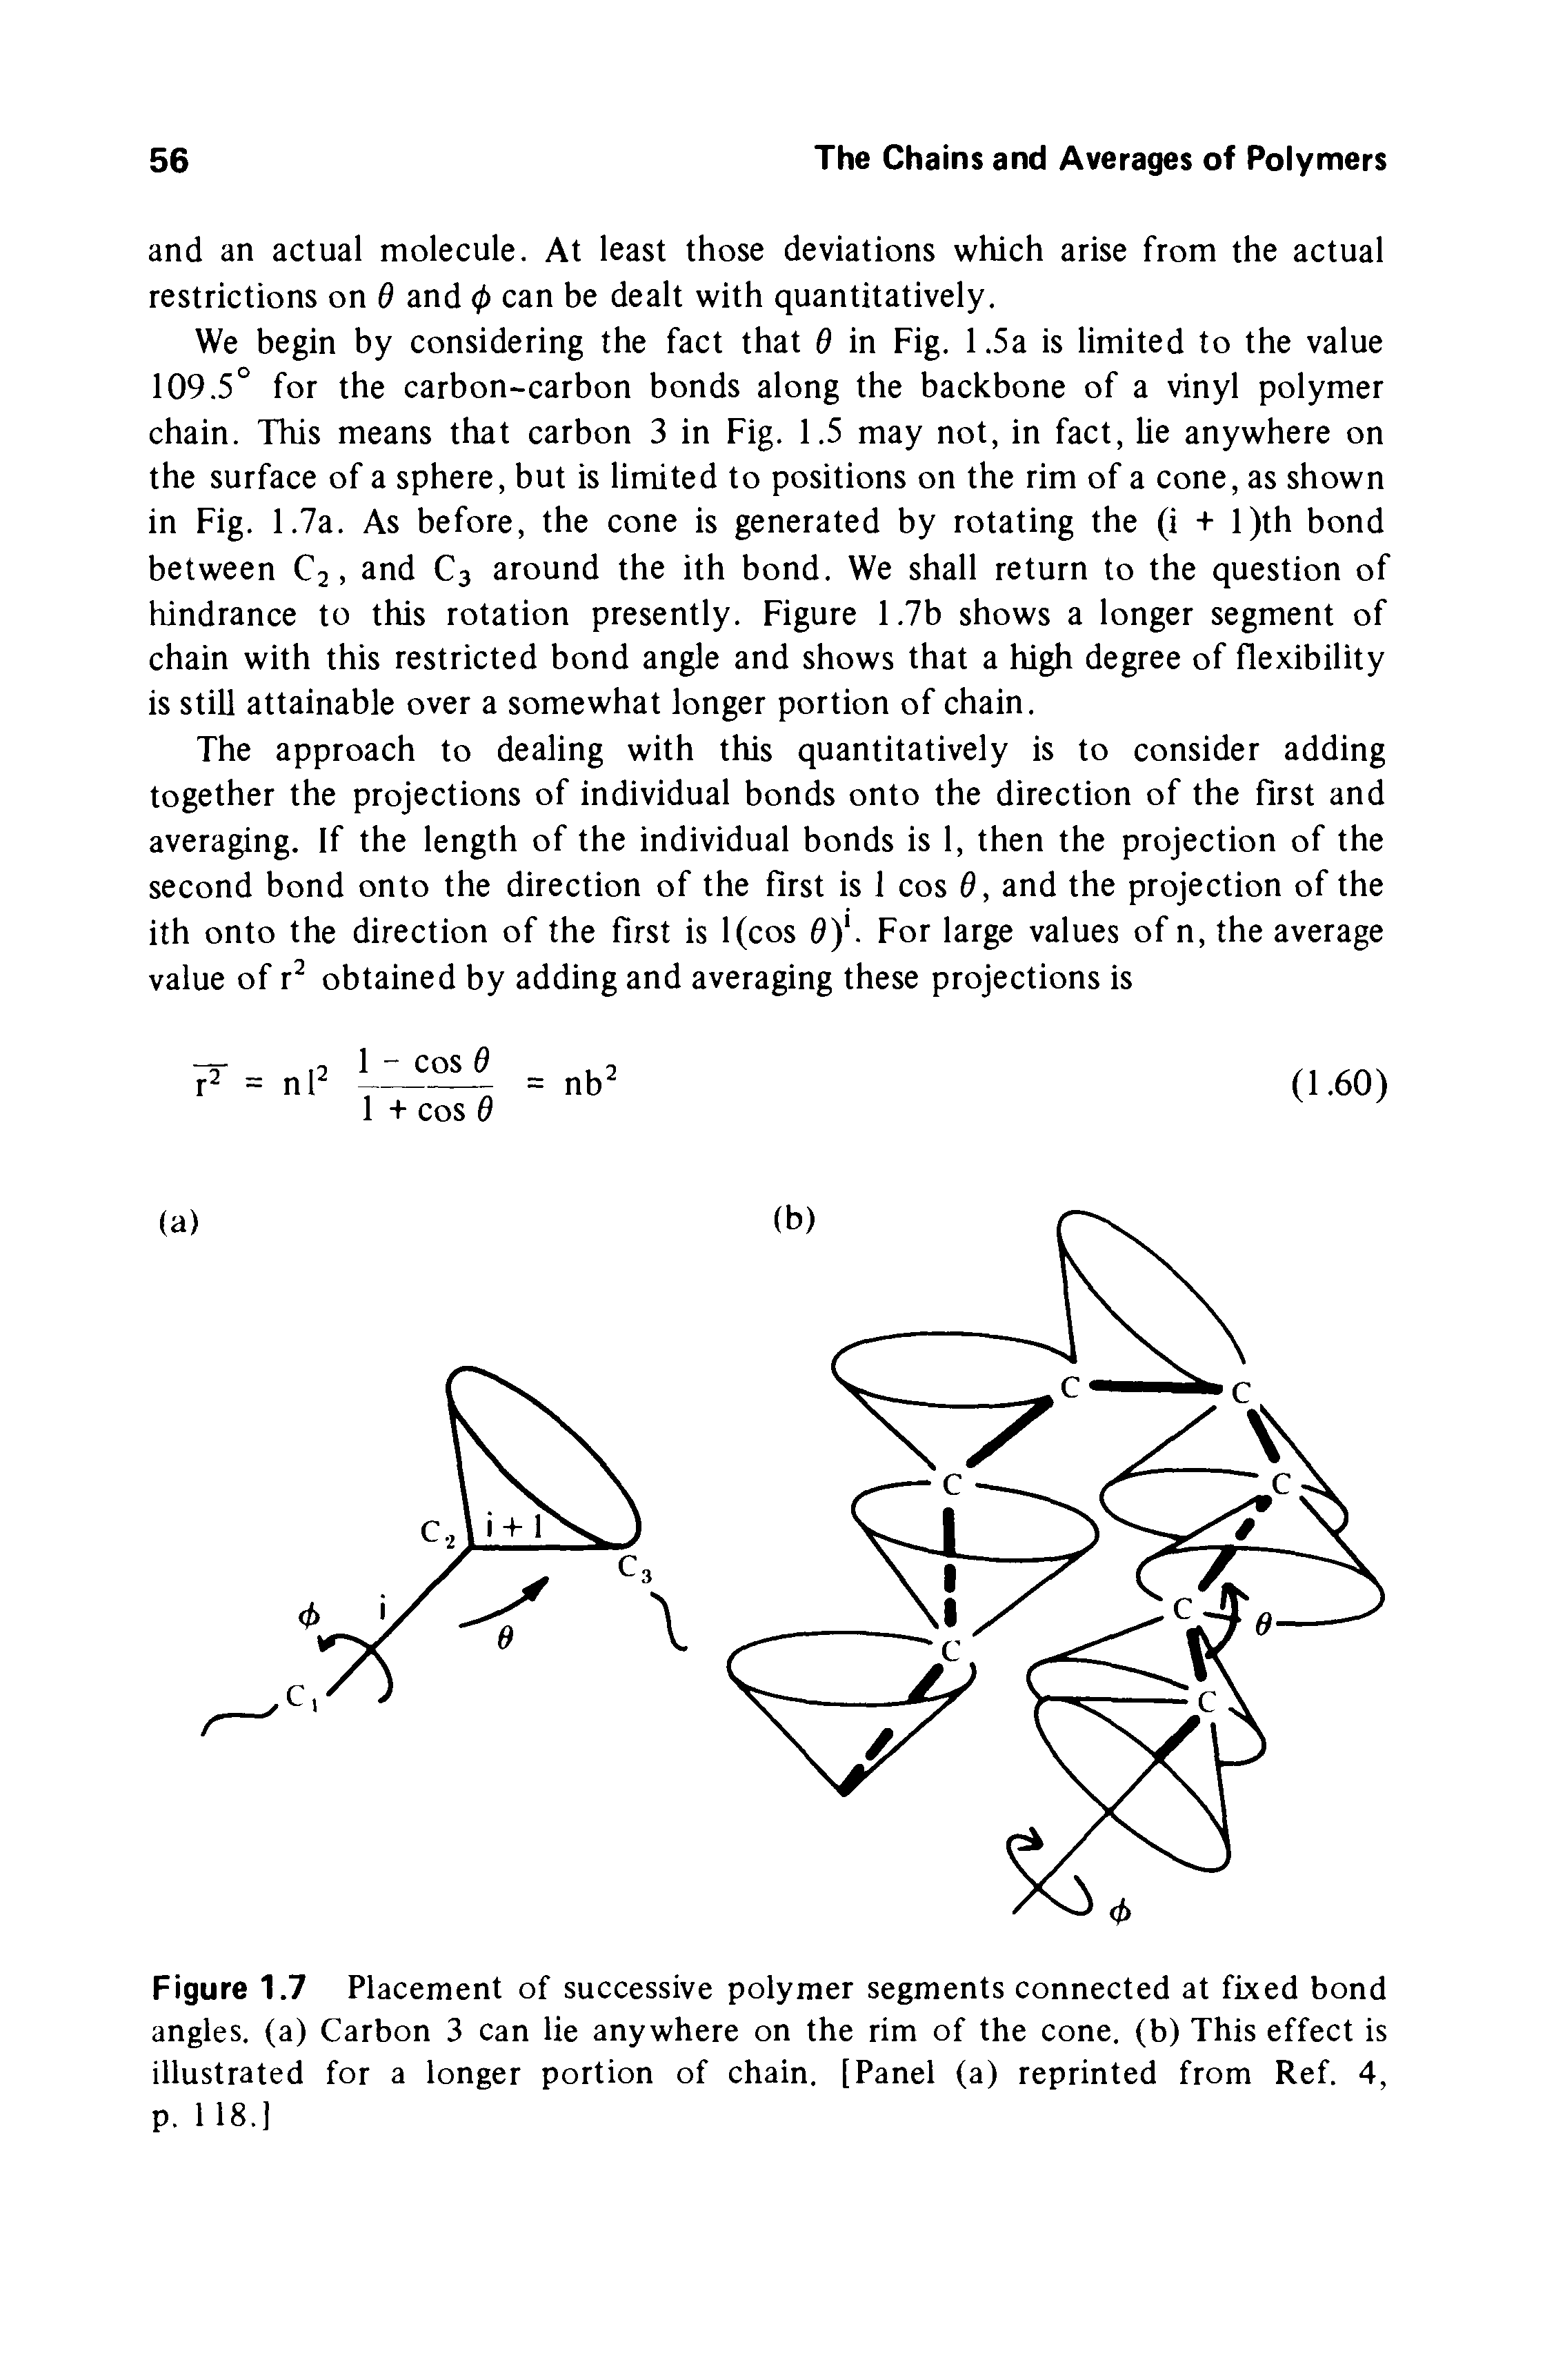 Figure 1.7 Placement of successive polymer segments connected at fixed bond angles, (a) Carbon 3 can lie anywhere on the rim of the cone, (b) This effect is illustrated for a longer portion of chain. [Panel (a) reprinted from Ref. 4, p. 118.]...